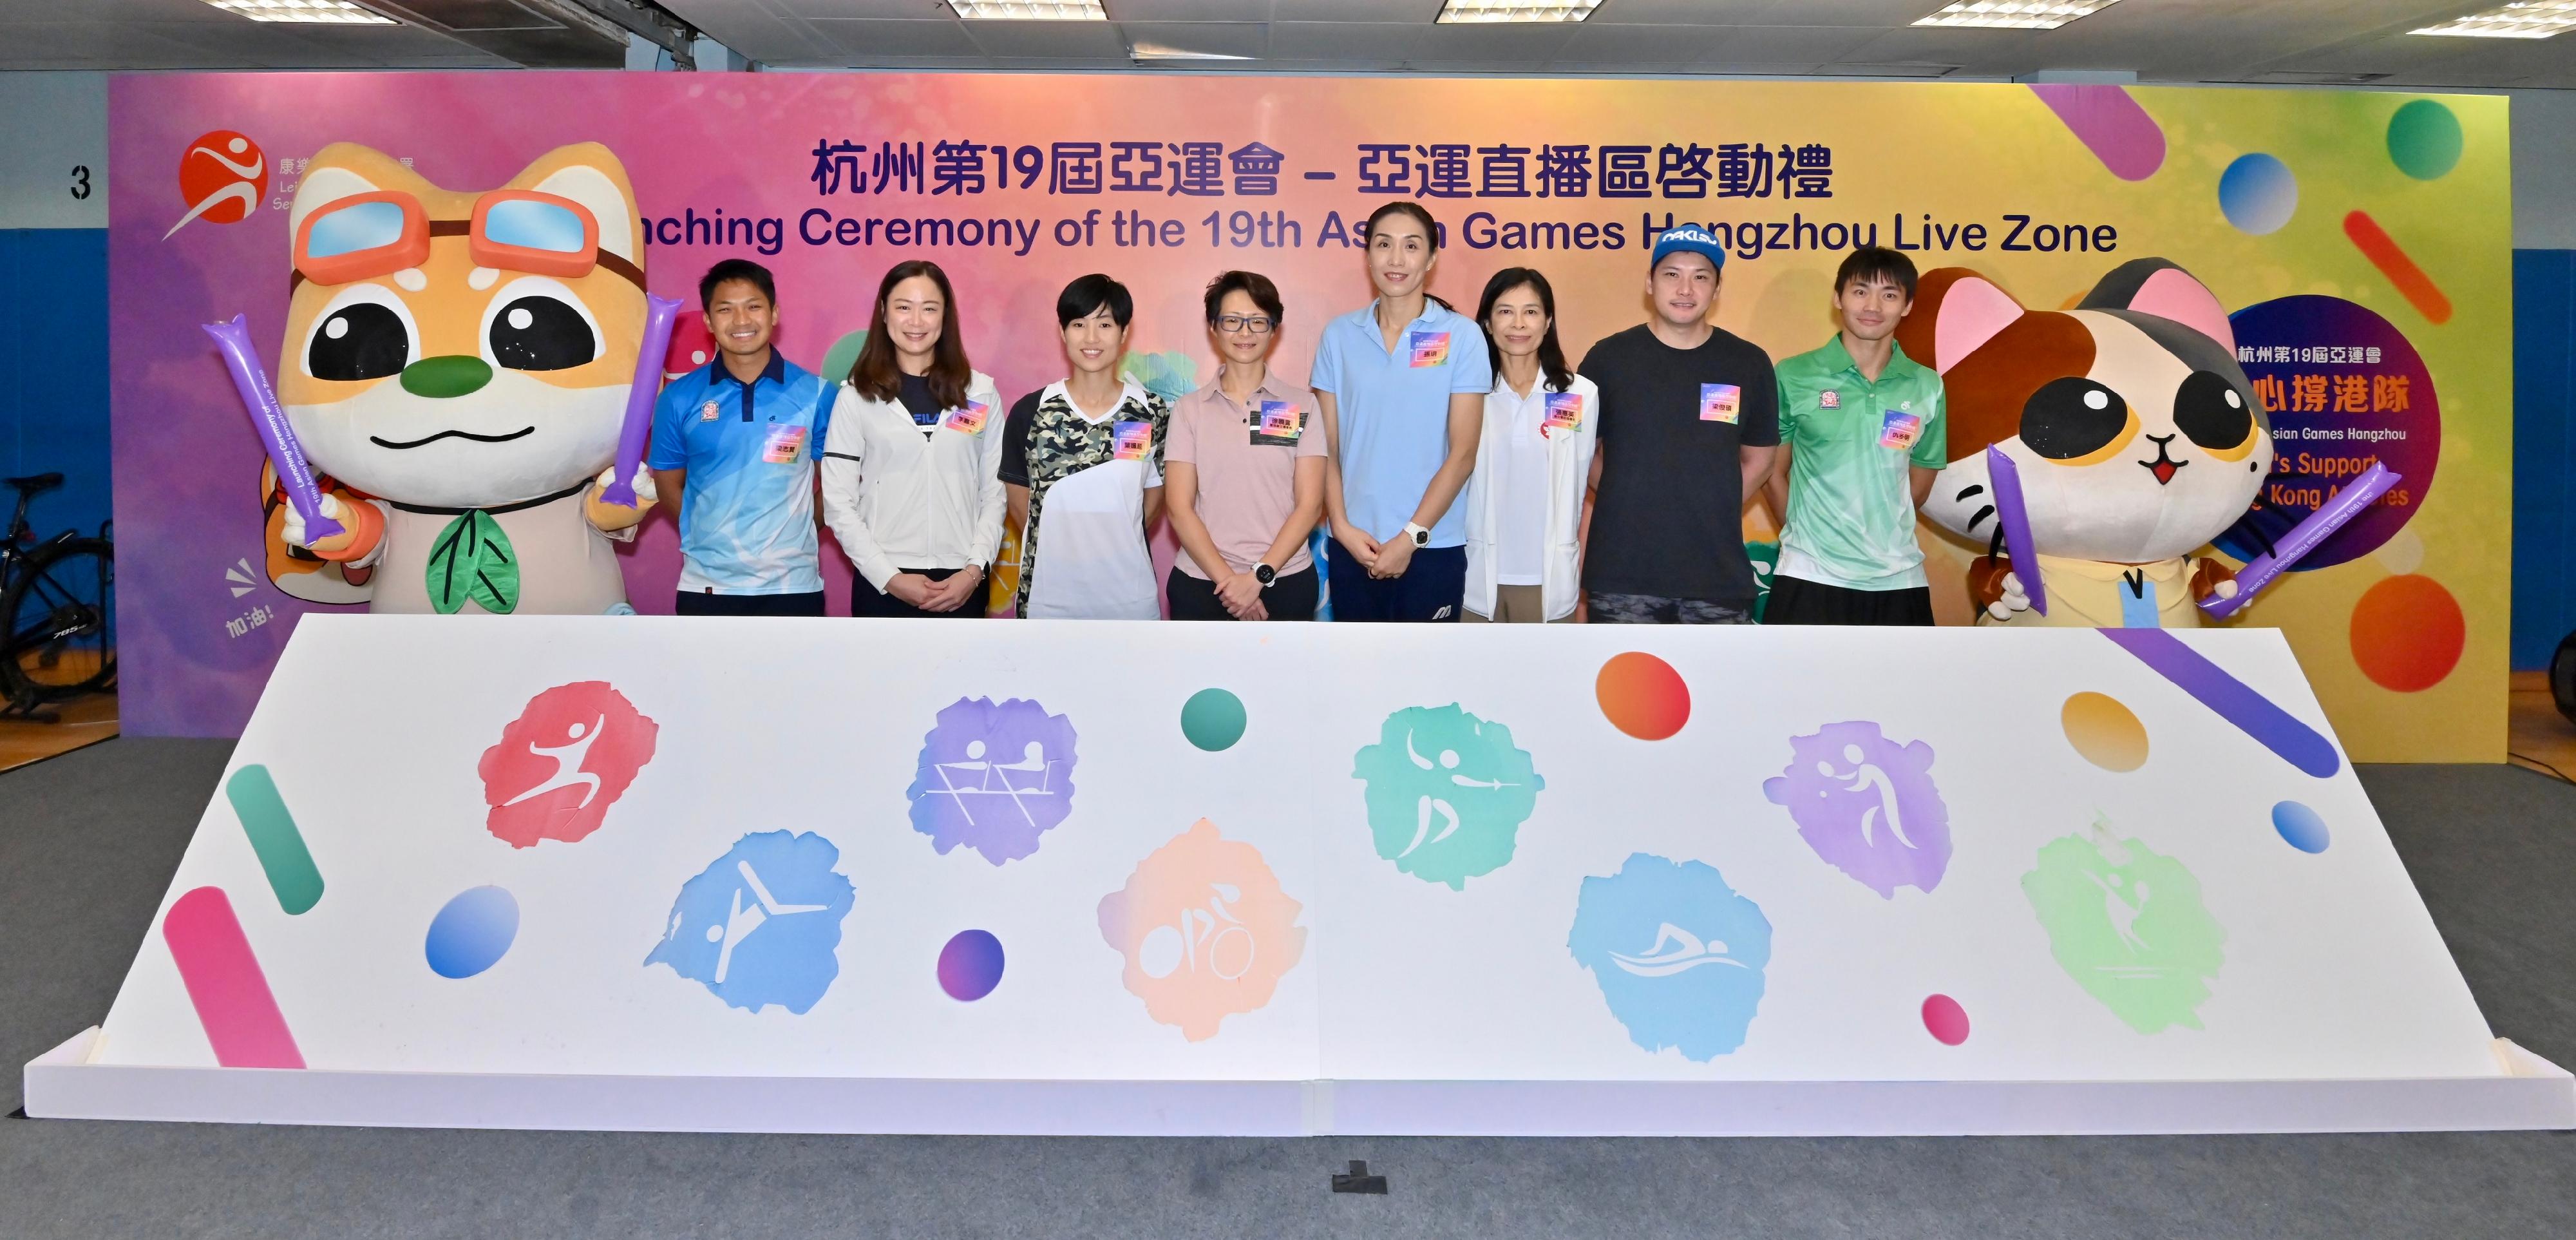 The Leisure and Cultural Services Department held the "Launching Ceremony of the 19th Asian Games Hangzhou Live Zone" at the Secondary Hall of the Kowloon Park Sports Centre today (September 23). Photo shows the Acting Director of Leisure and Cultural Services, Miss Winnie Chui (fourth left); the Assistant Director of Leisure and Cultural Services (Leisure Services)2, Ms Olivia Cheung (third right); former China women’s volleyball team captain Sun Yue (fourth right); badminton athlete Yip Pui-yin (third left); former rowing athlete Lee Ka-man (second left); former rowing athlete Leung Chun-shek (second right); former cycling athlete Leung Chi-yin (first left), and former cycling athlete Chau Dor-ming (first right), officiating at the ceremony.